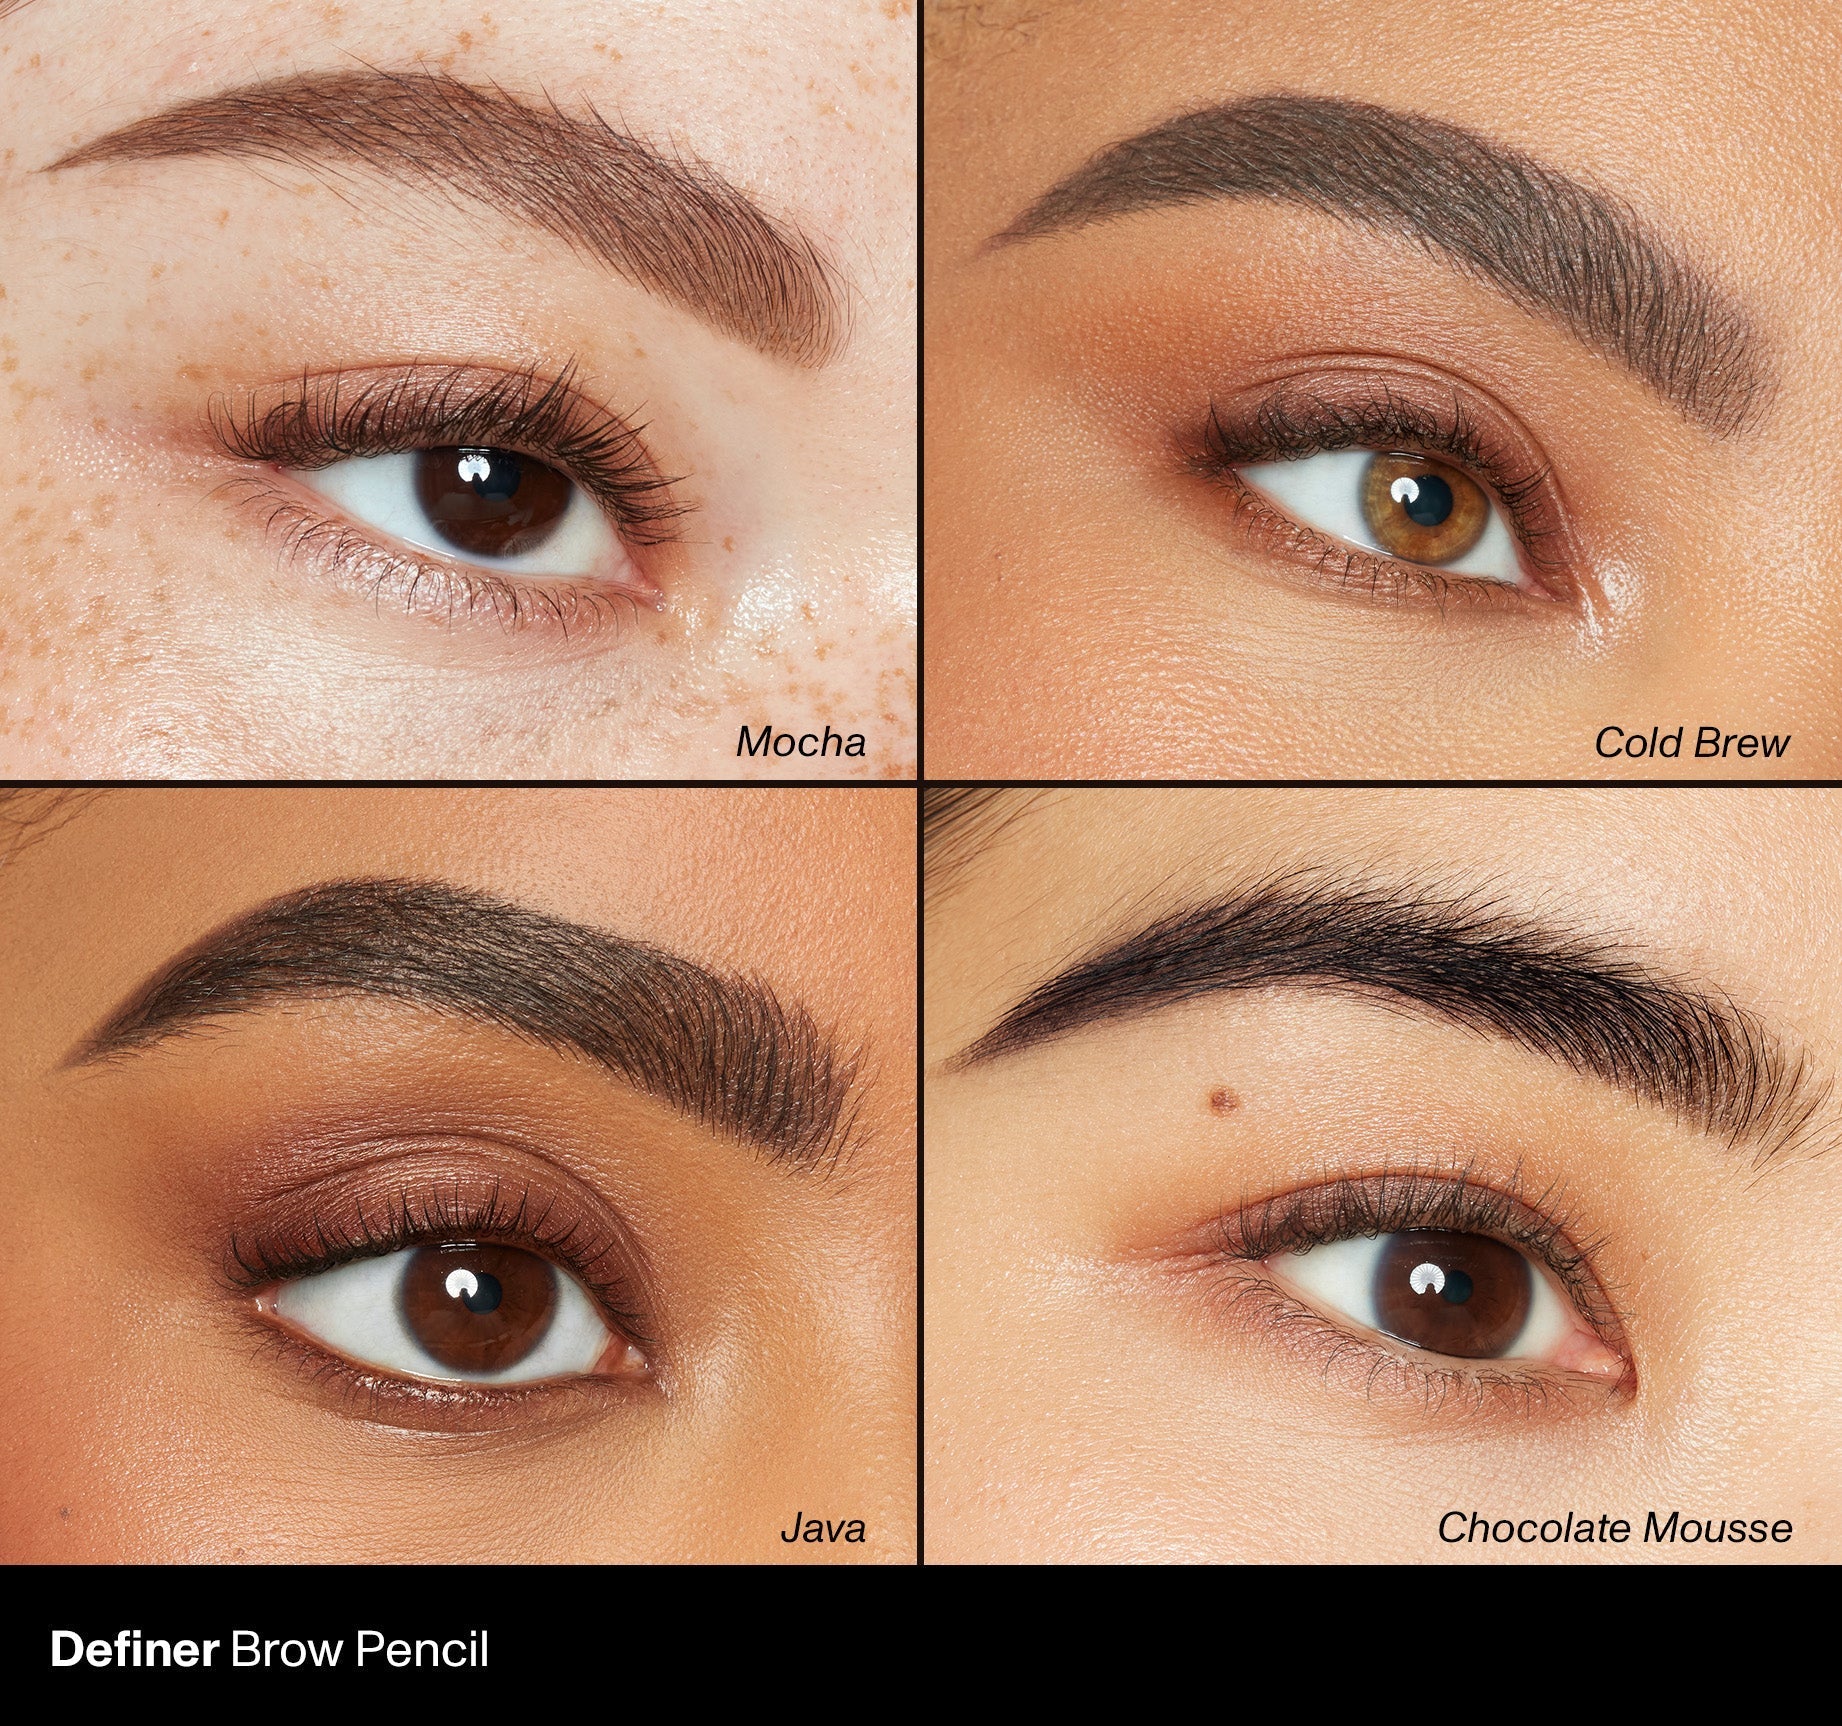 Definer Dual-Ended Brow Pencil & Spoolie - Chocolate Mousse - Image 3